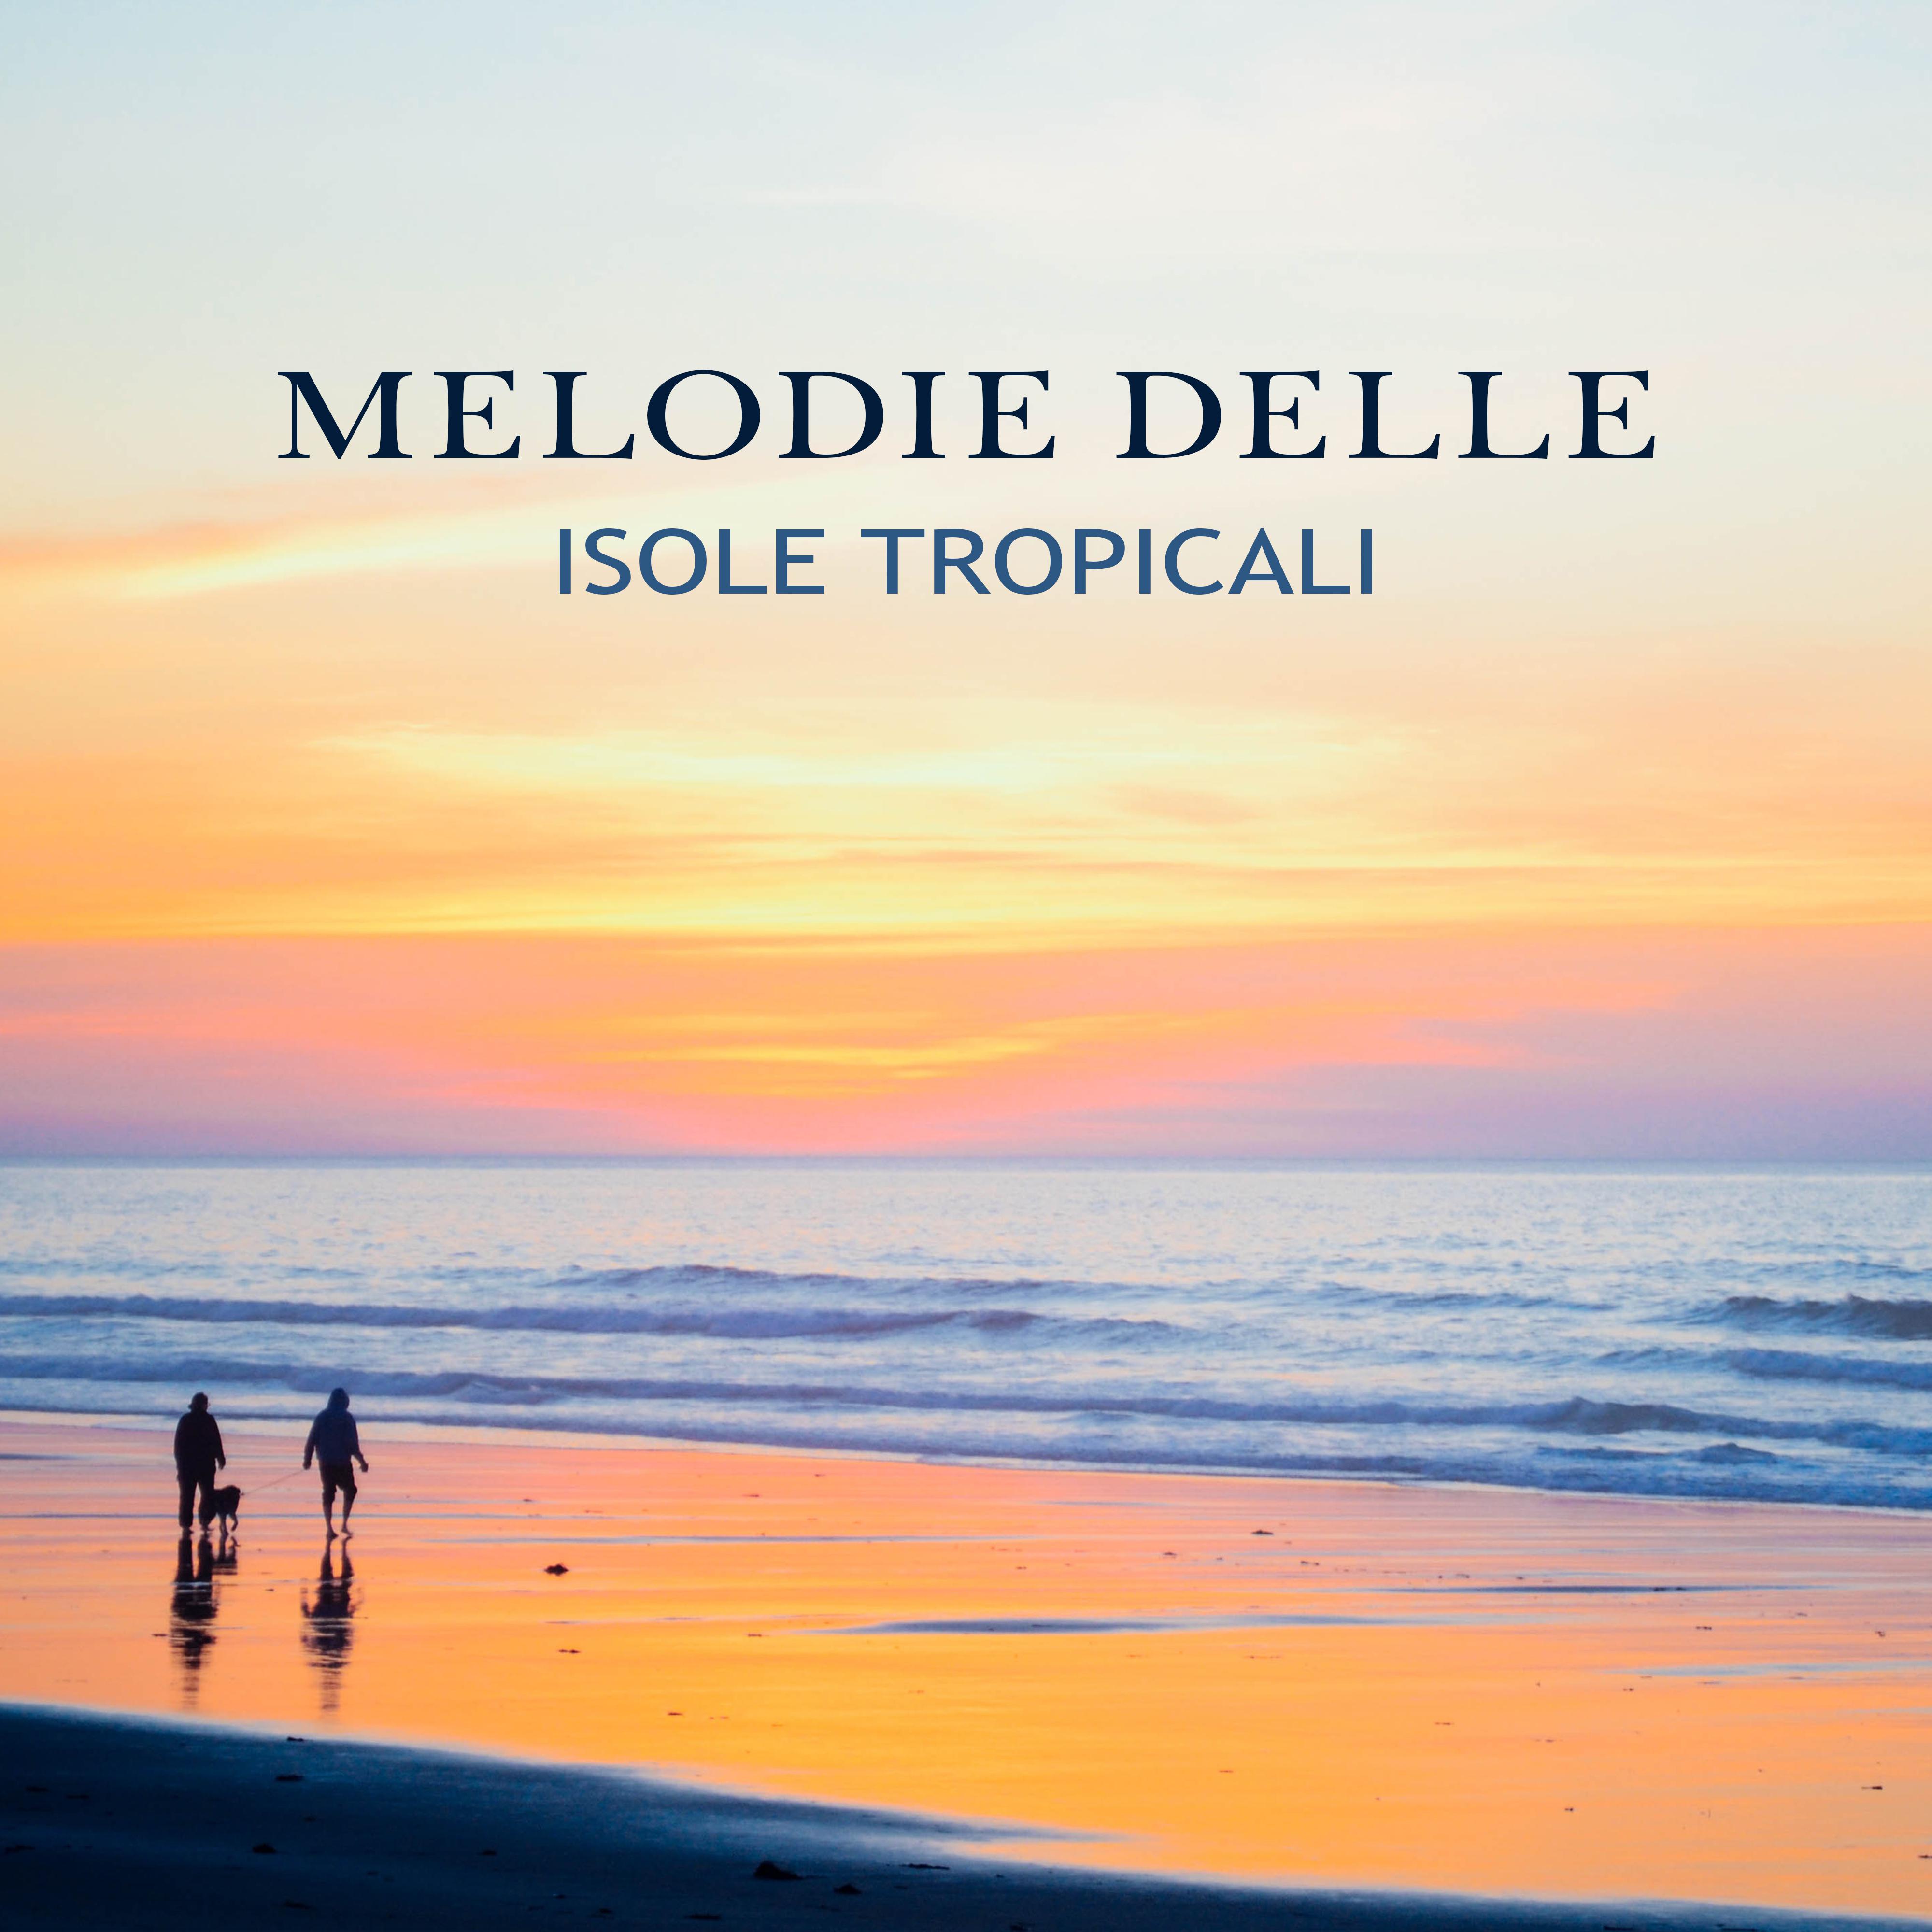 Melodie delle isole tropicali